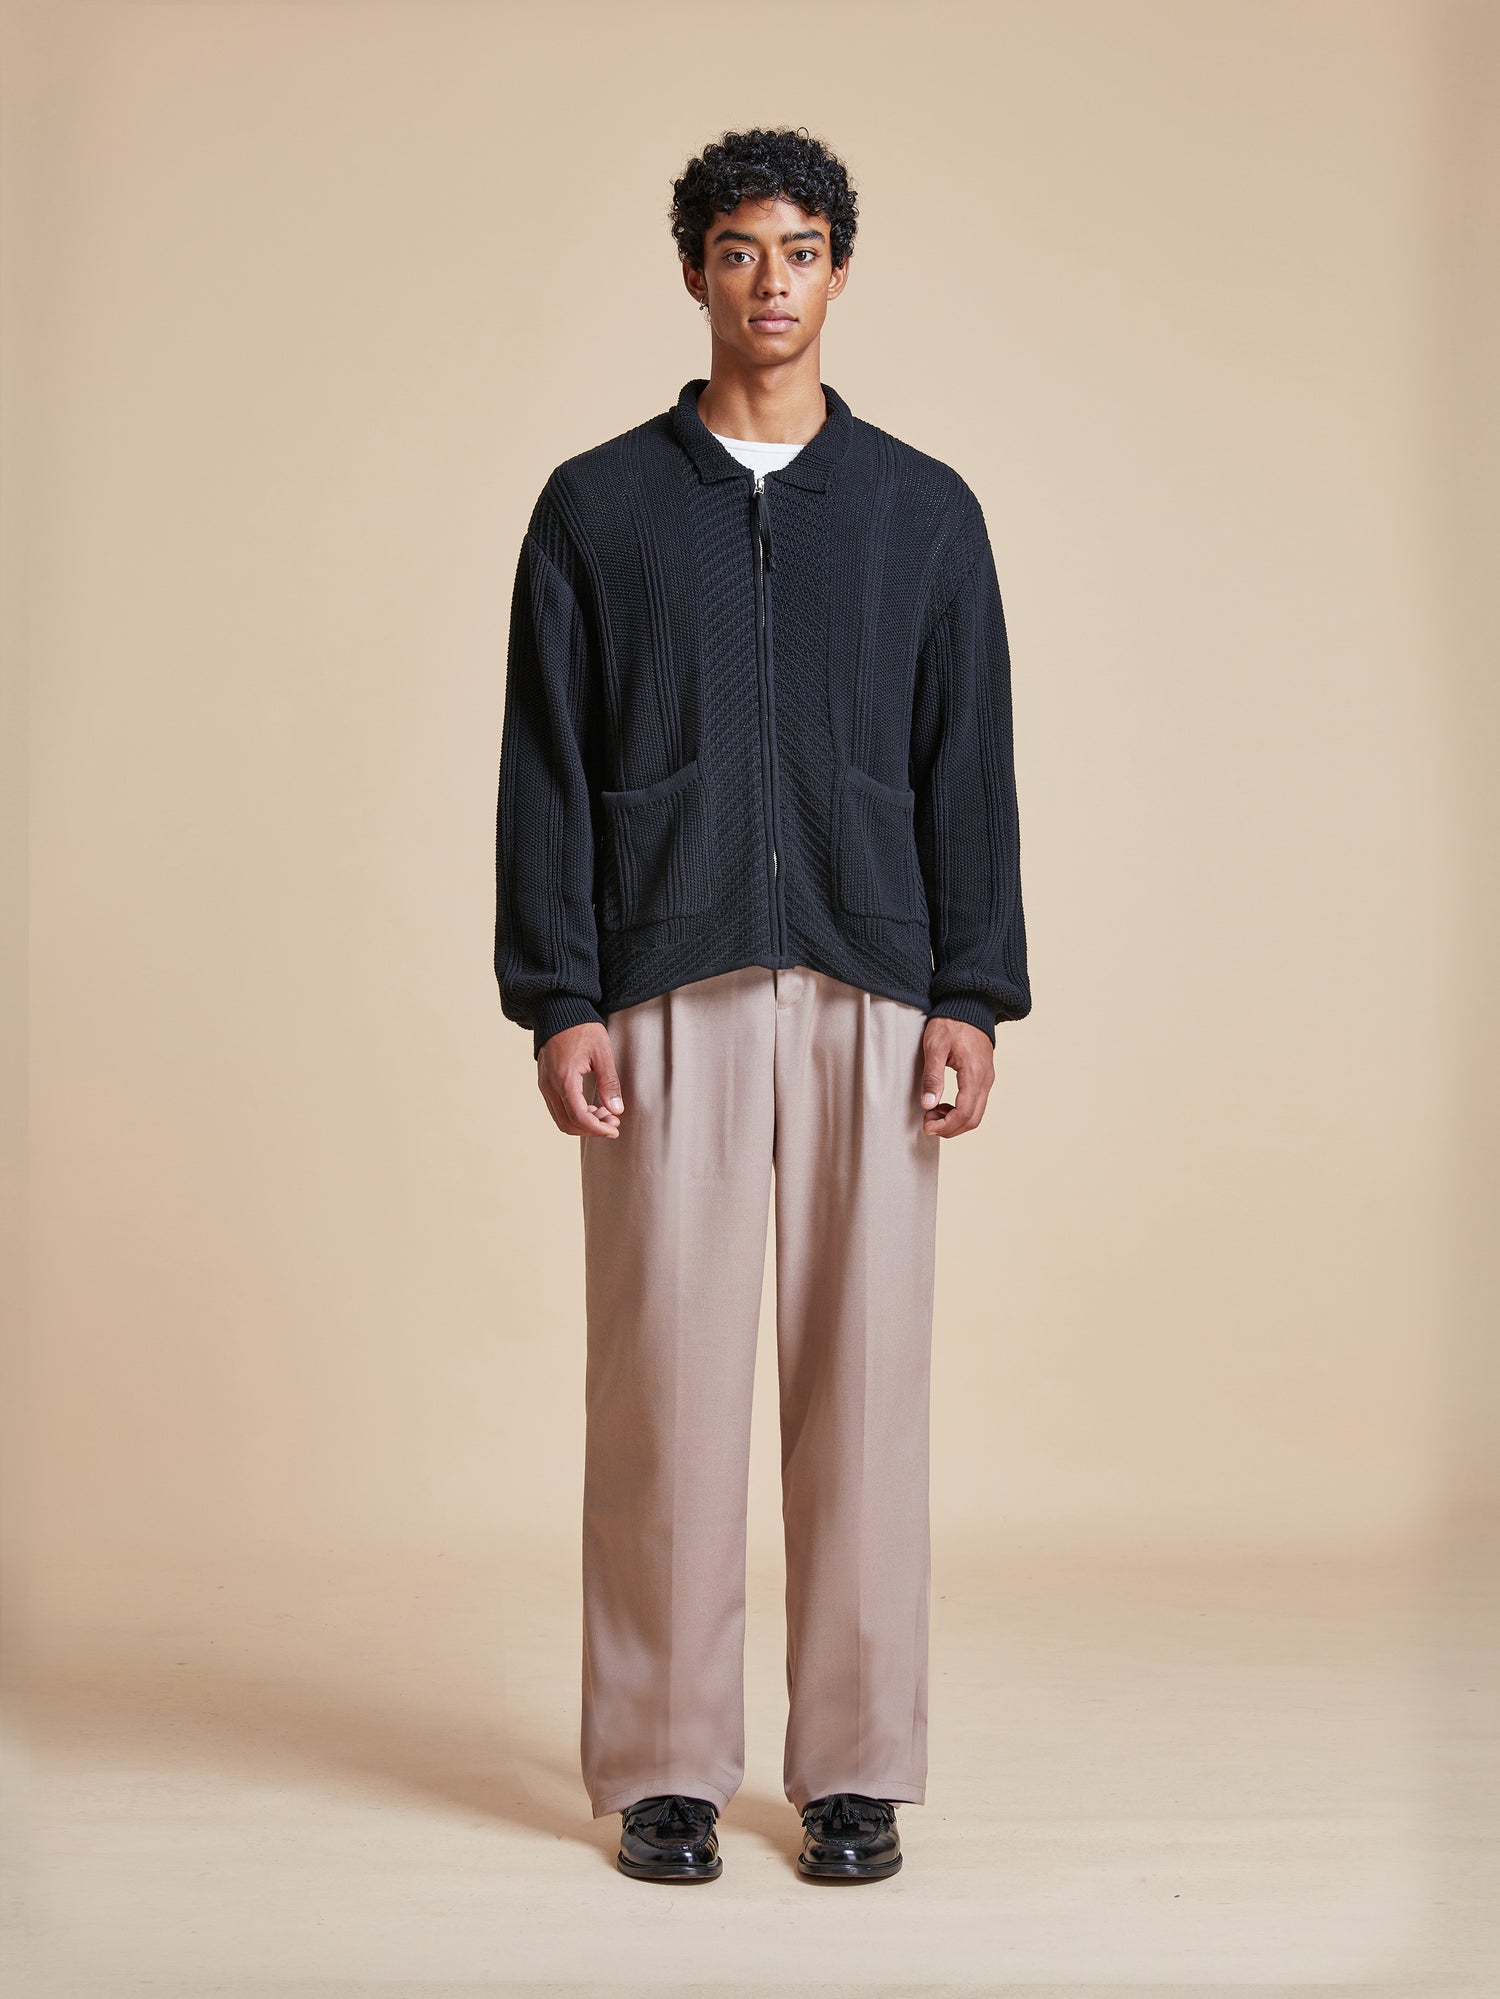 The model is wearing a Found Zip Up Panel Knit Ribbed Sweater and beige pants.